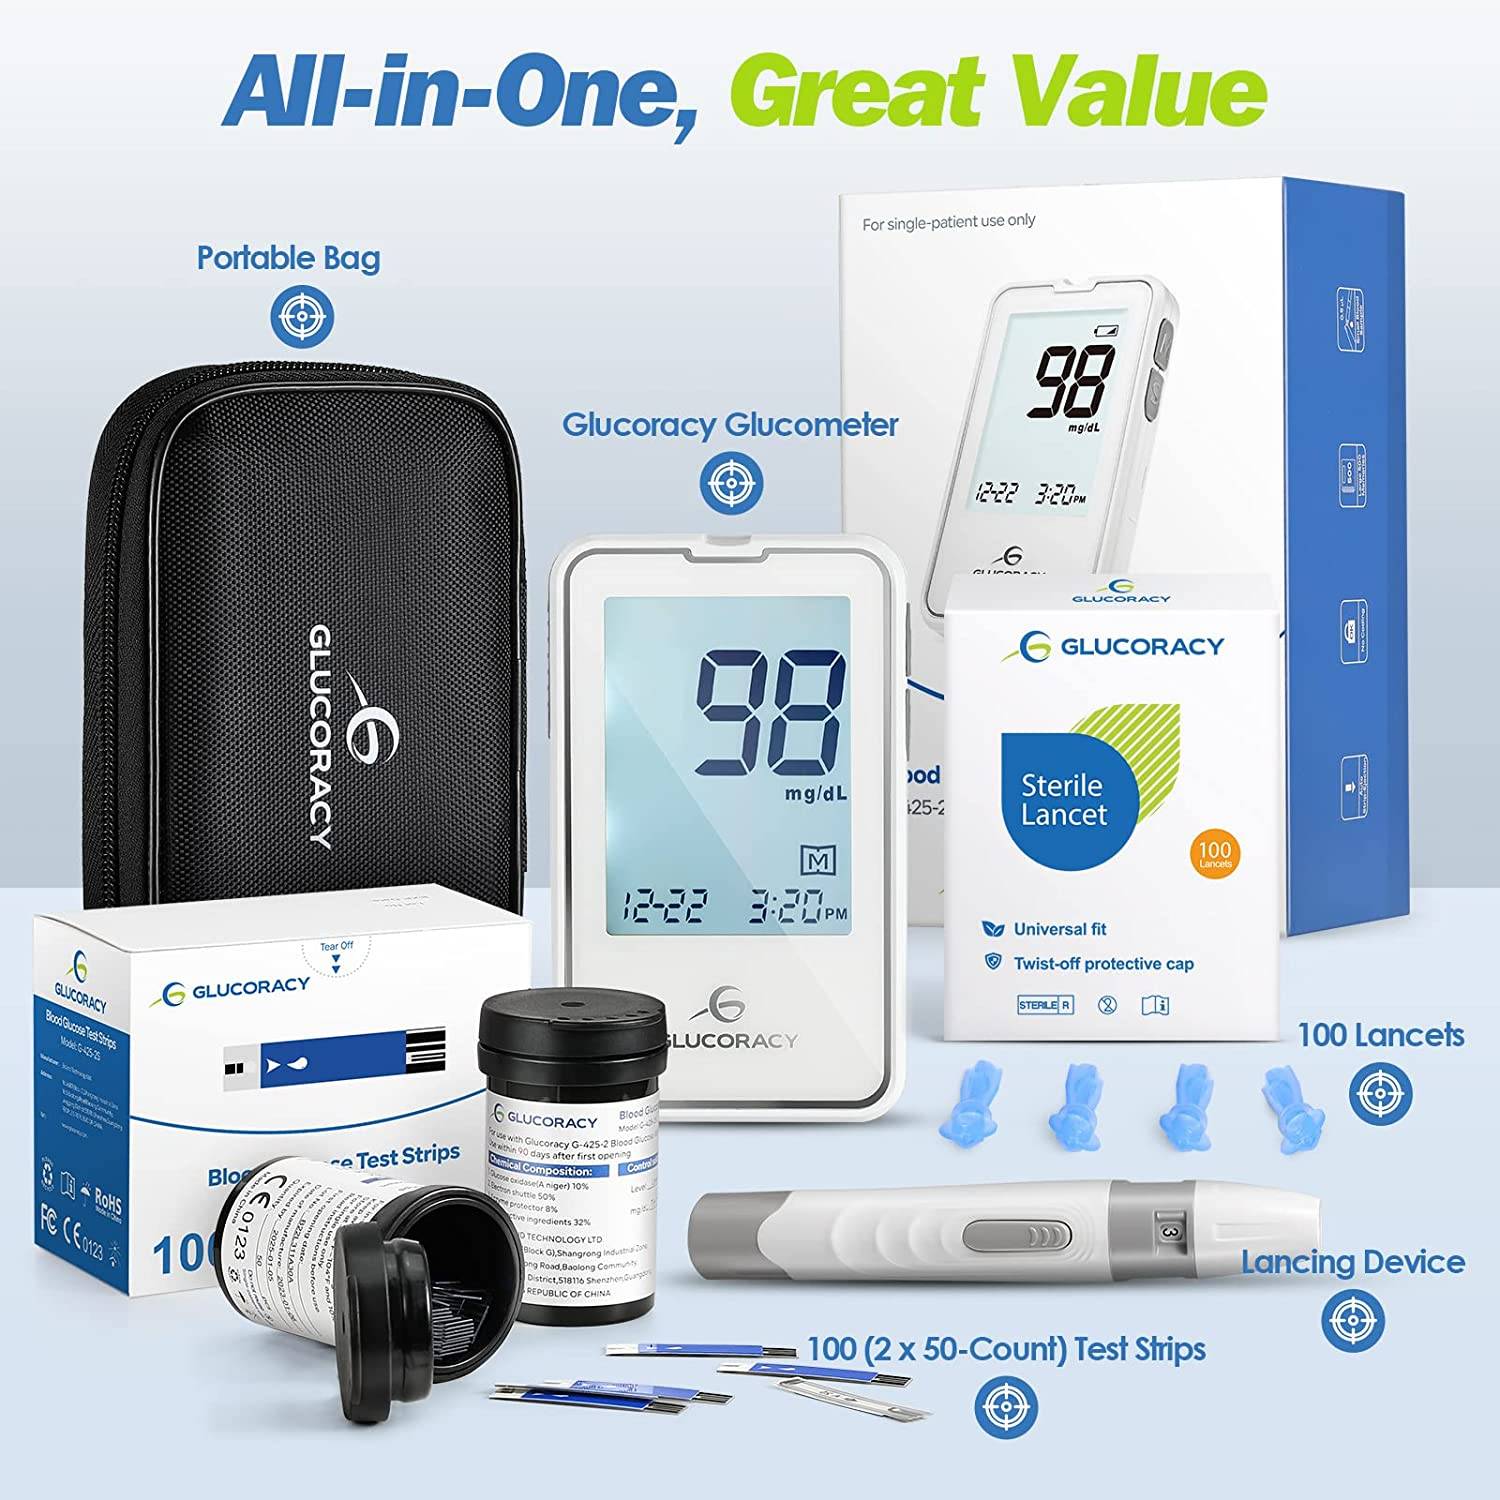 g-425-2 all-in-one blood glucose minitor kit